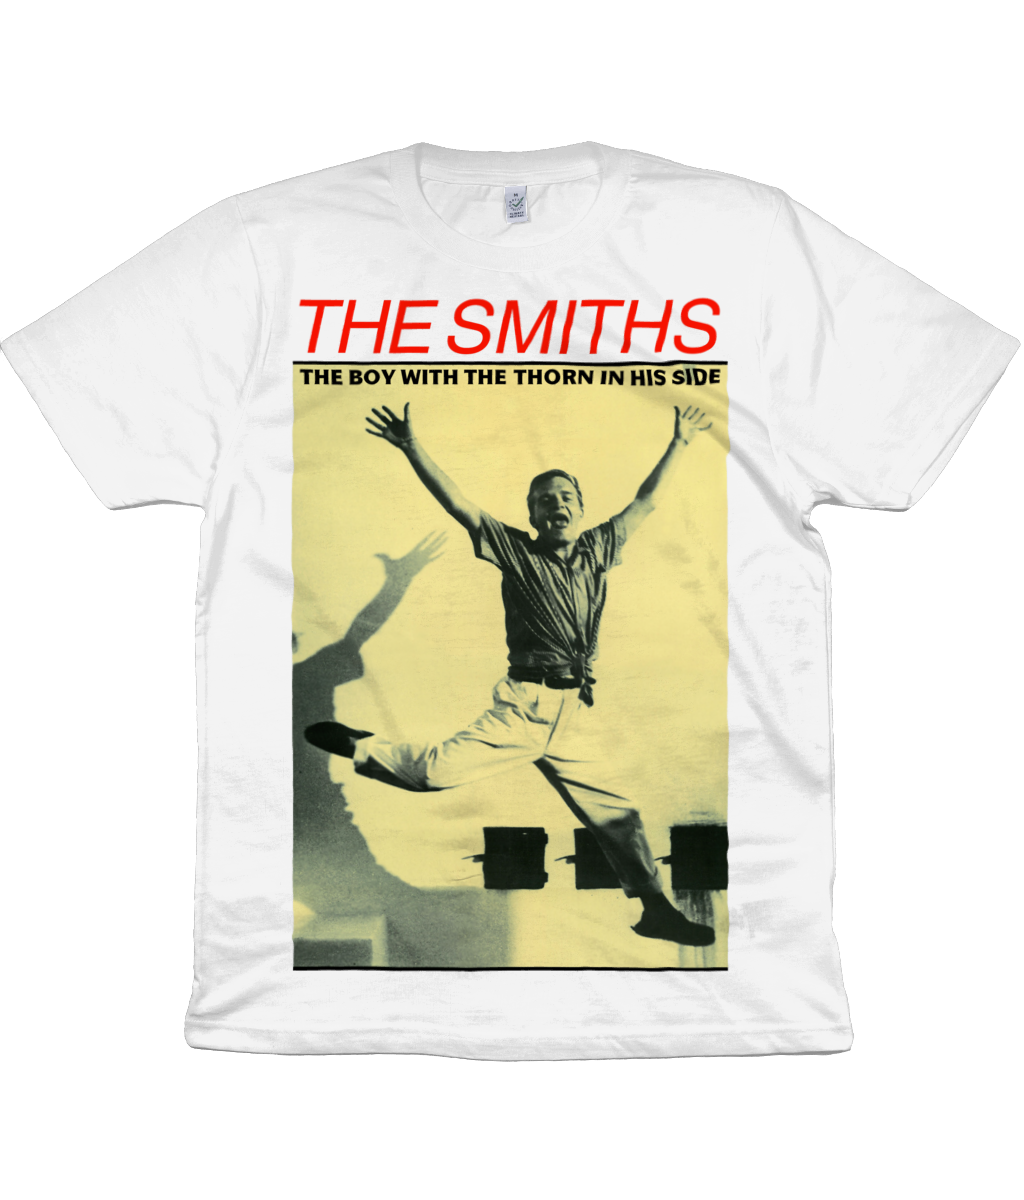 THE SMITHS - THE BOY WITH THE THORN IN HIS SIDE - 1986 - Promo